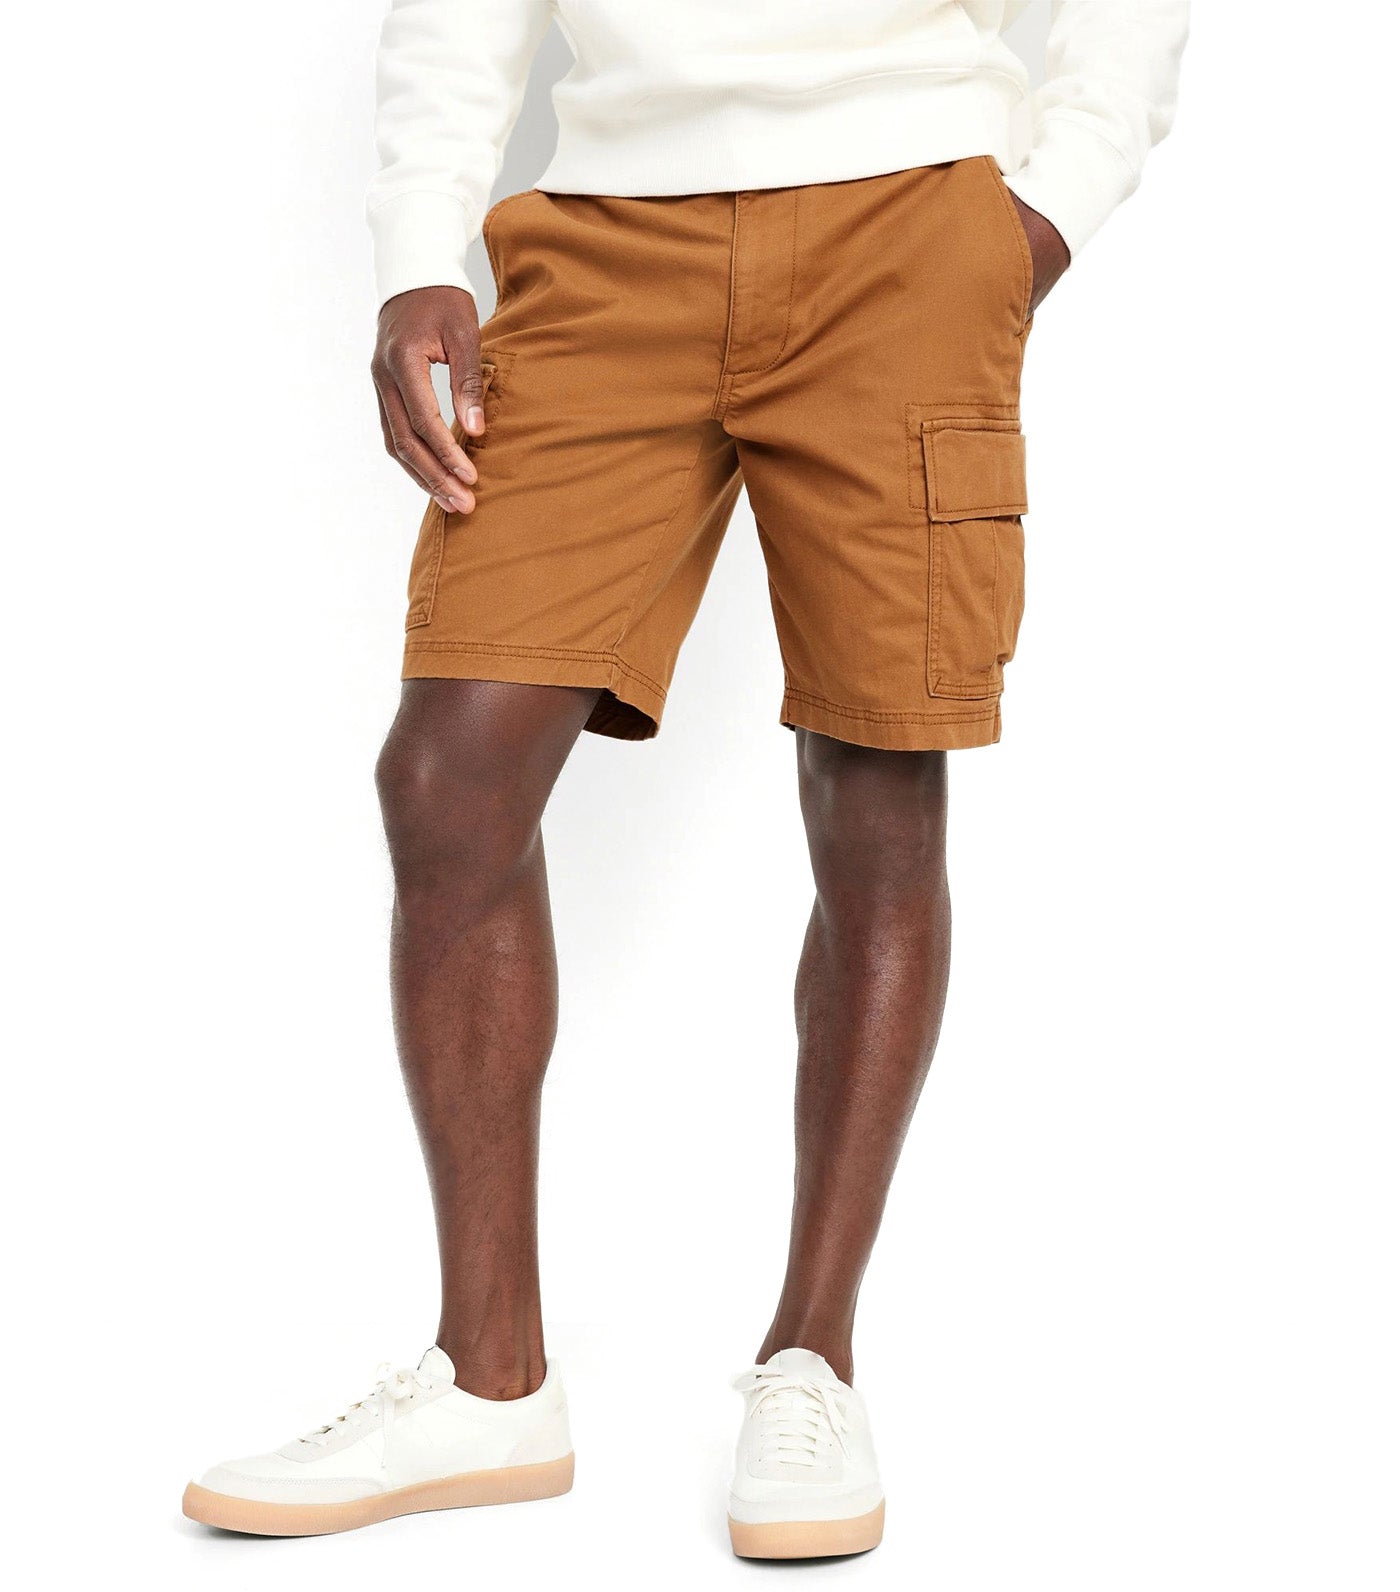 Lived-In Cargo Shorts For Men - 10-Inch Inseam Falconry